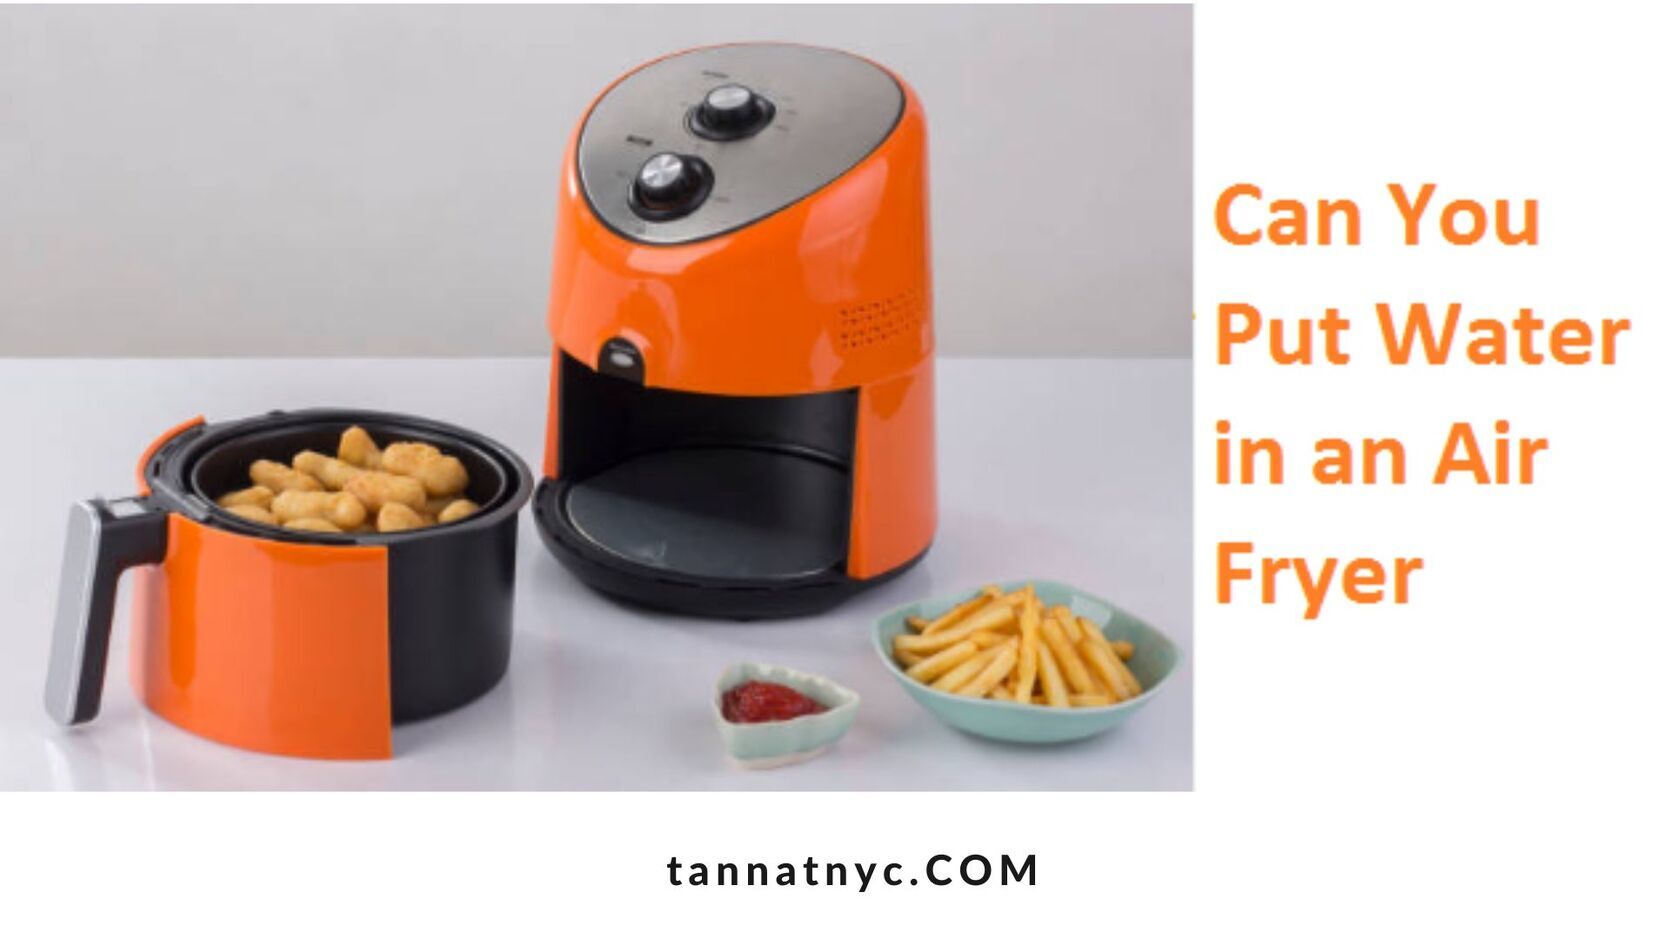 Can You Put Water in an Air Fryer?